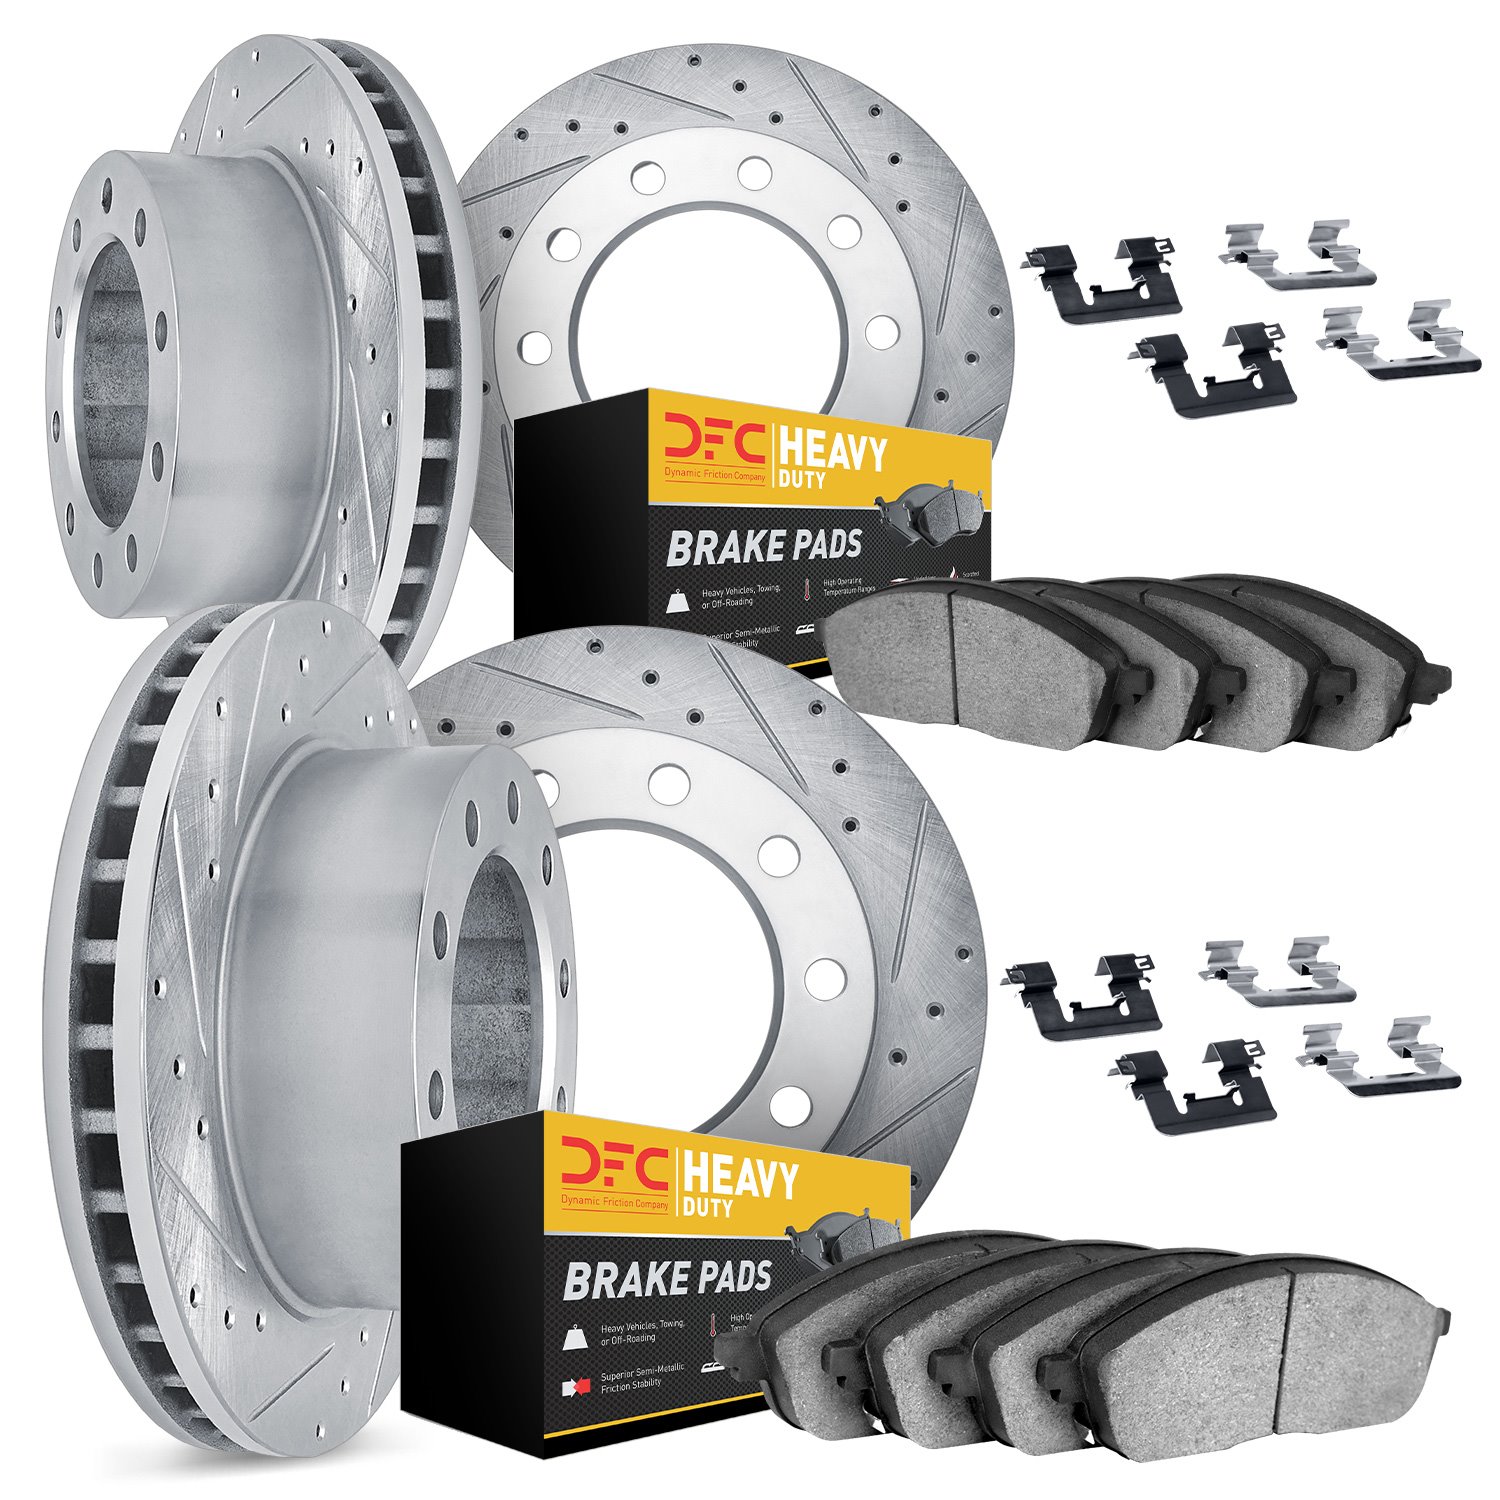 7214-99050 Drilled/Slotted Rotors w/Heavy-Duty Brake Pads Kit & Hardware [Silver], 2002-2005 Ford/Lincoln/Mercury/Mazda, Positio